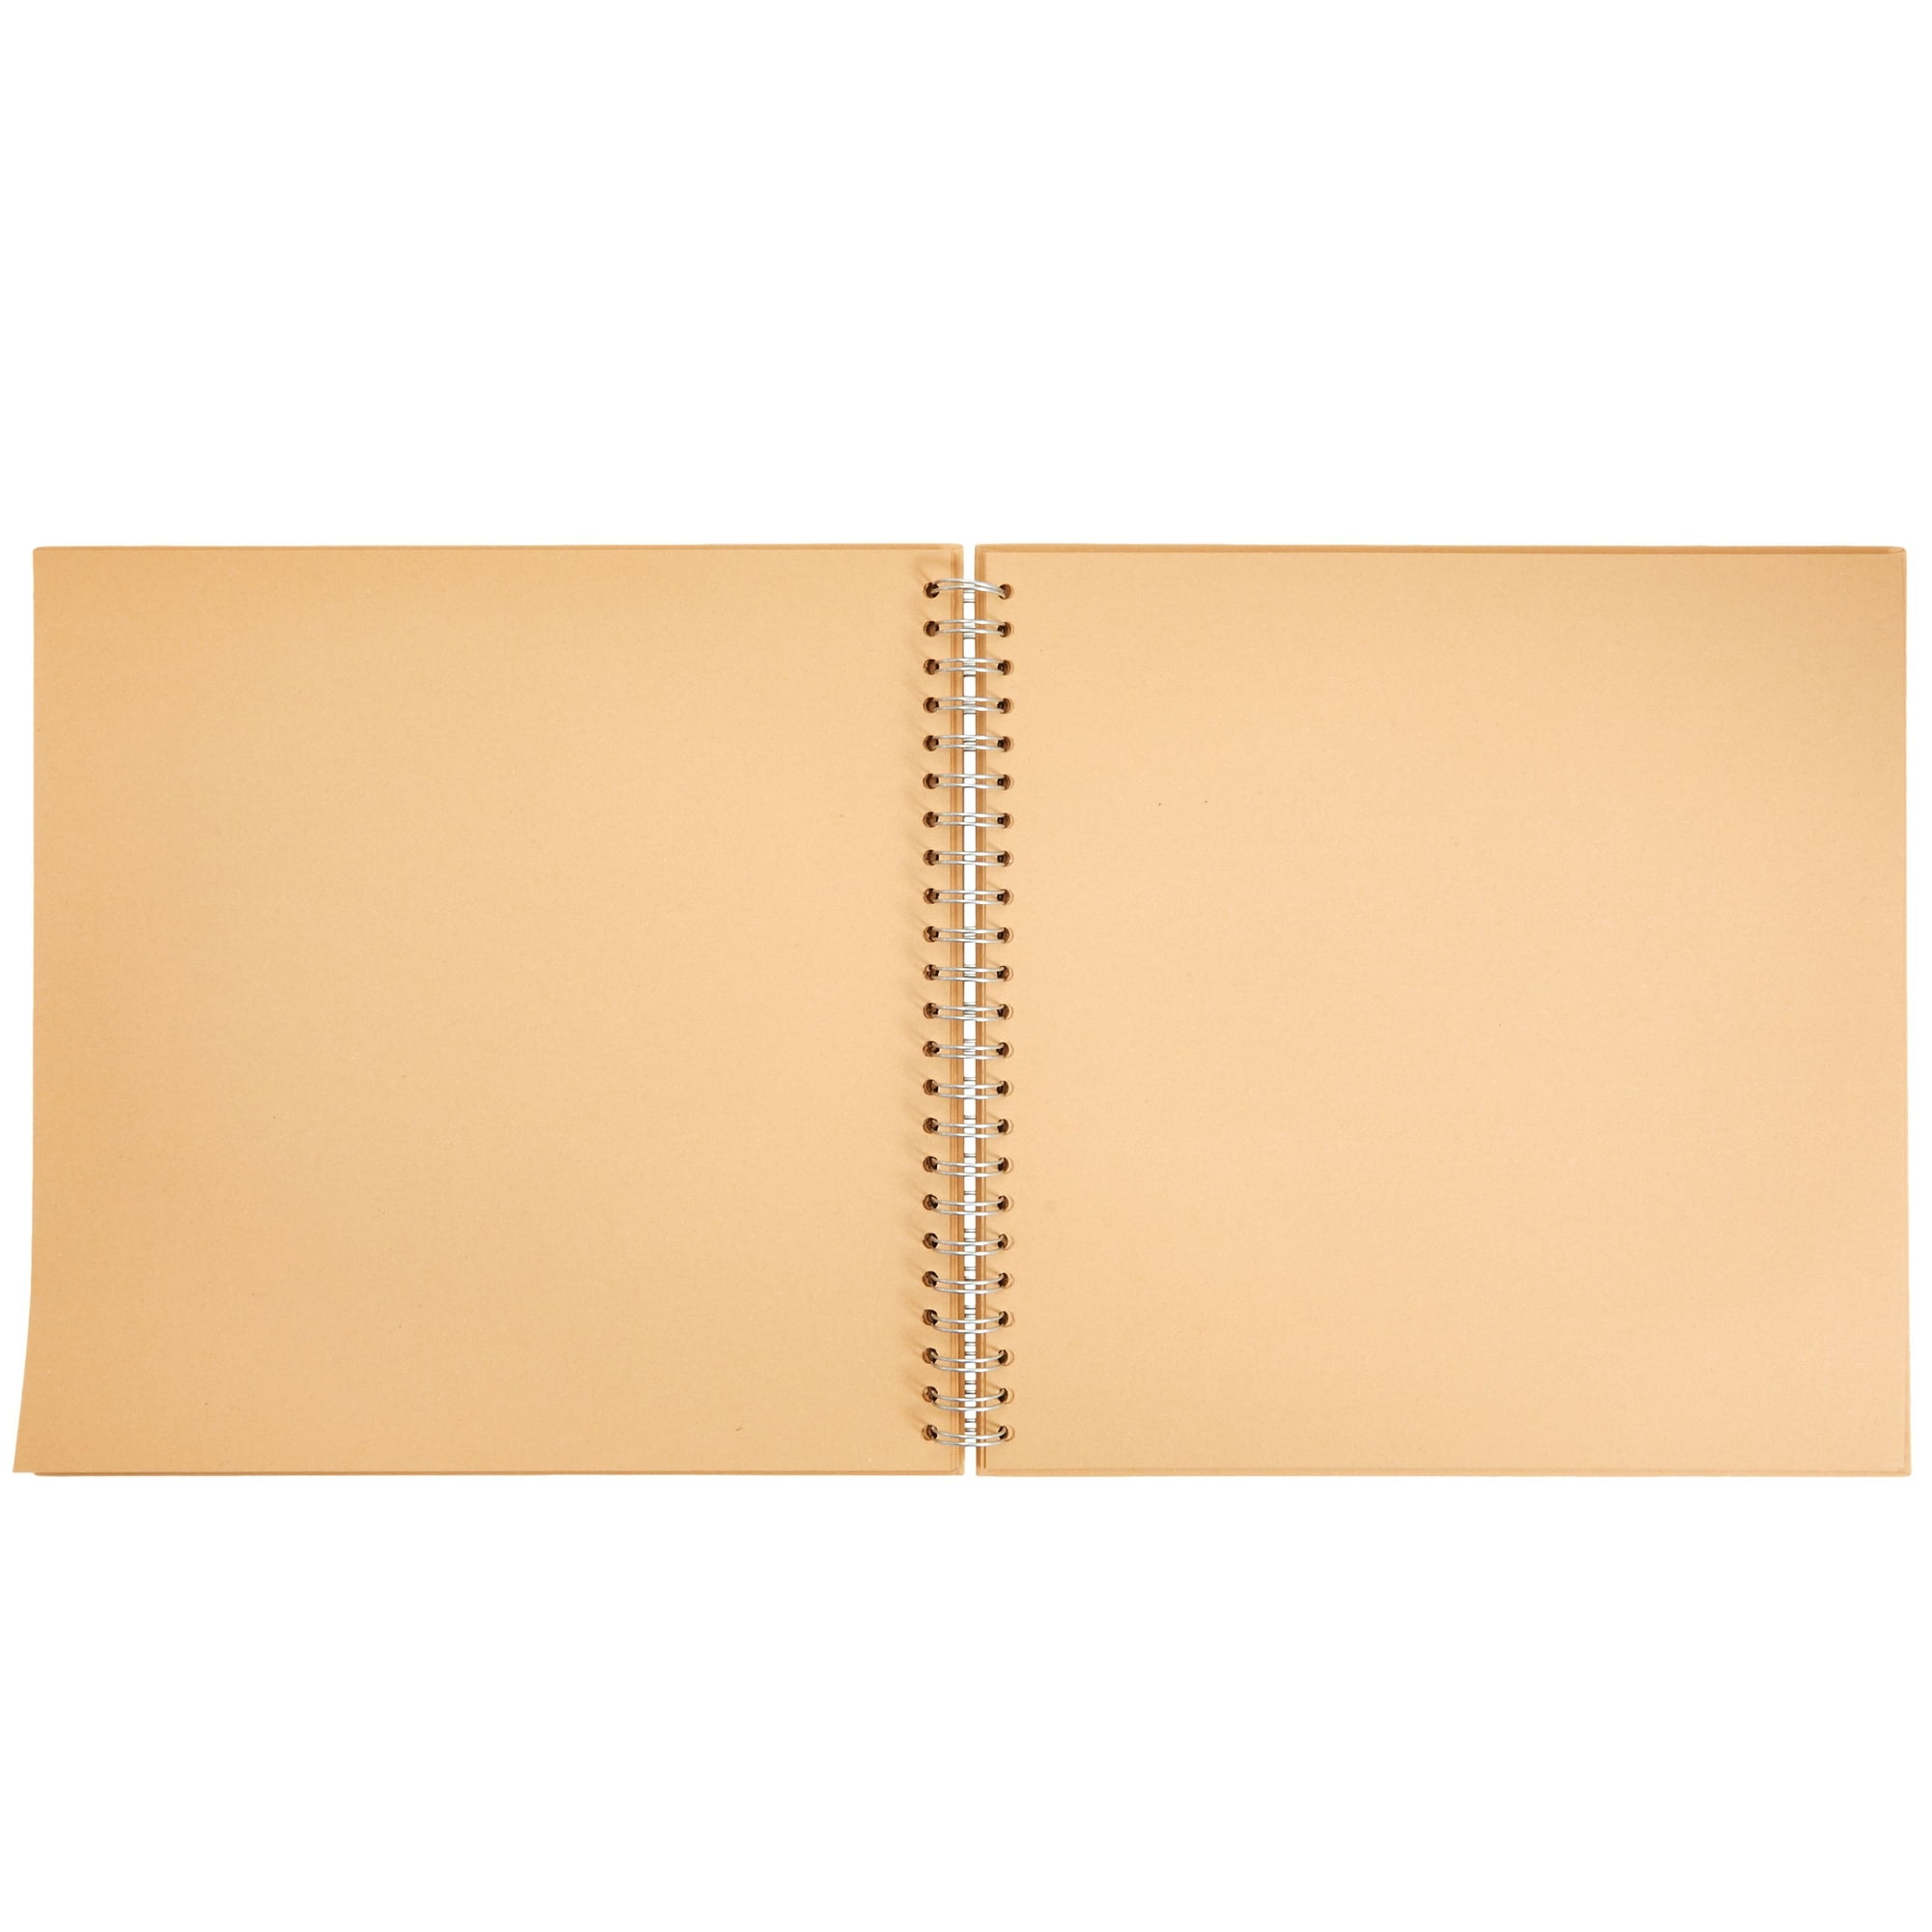 Small Scrapbook Album - Chipboard Covers - Cardstock Inner Pages 3 1/4 x  5 (Cream Paper Pages, 12 Pages Book Ring Binding)